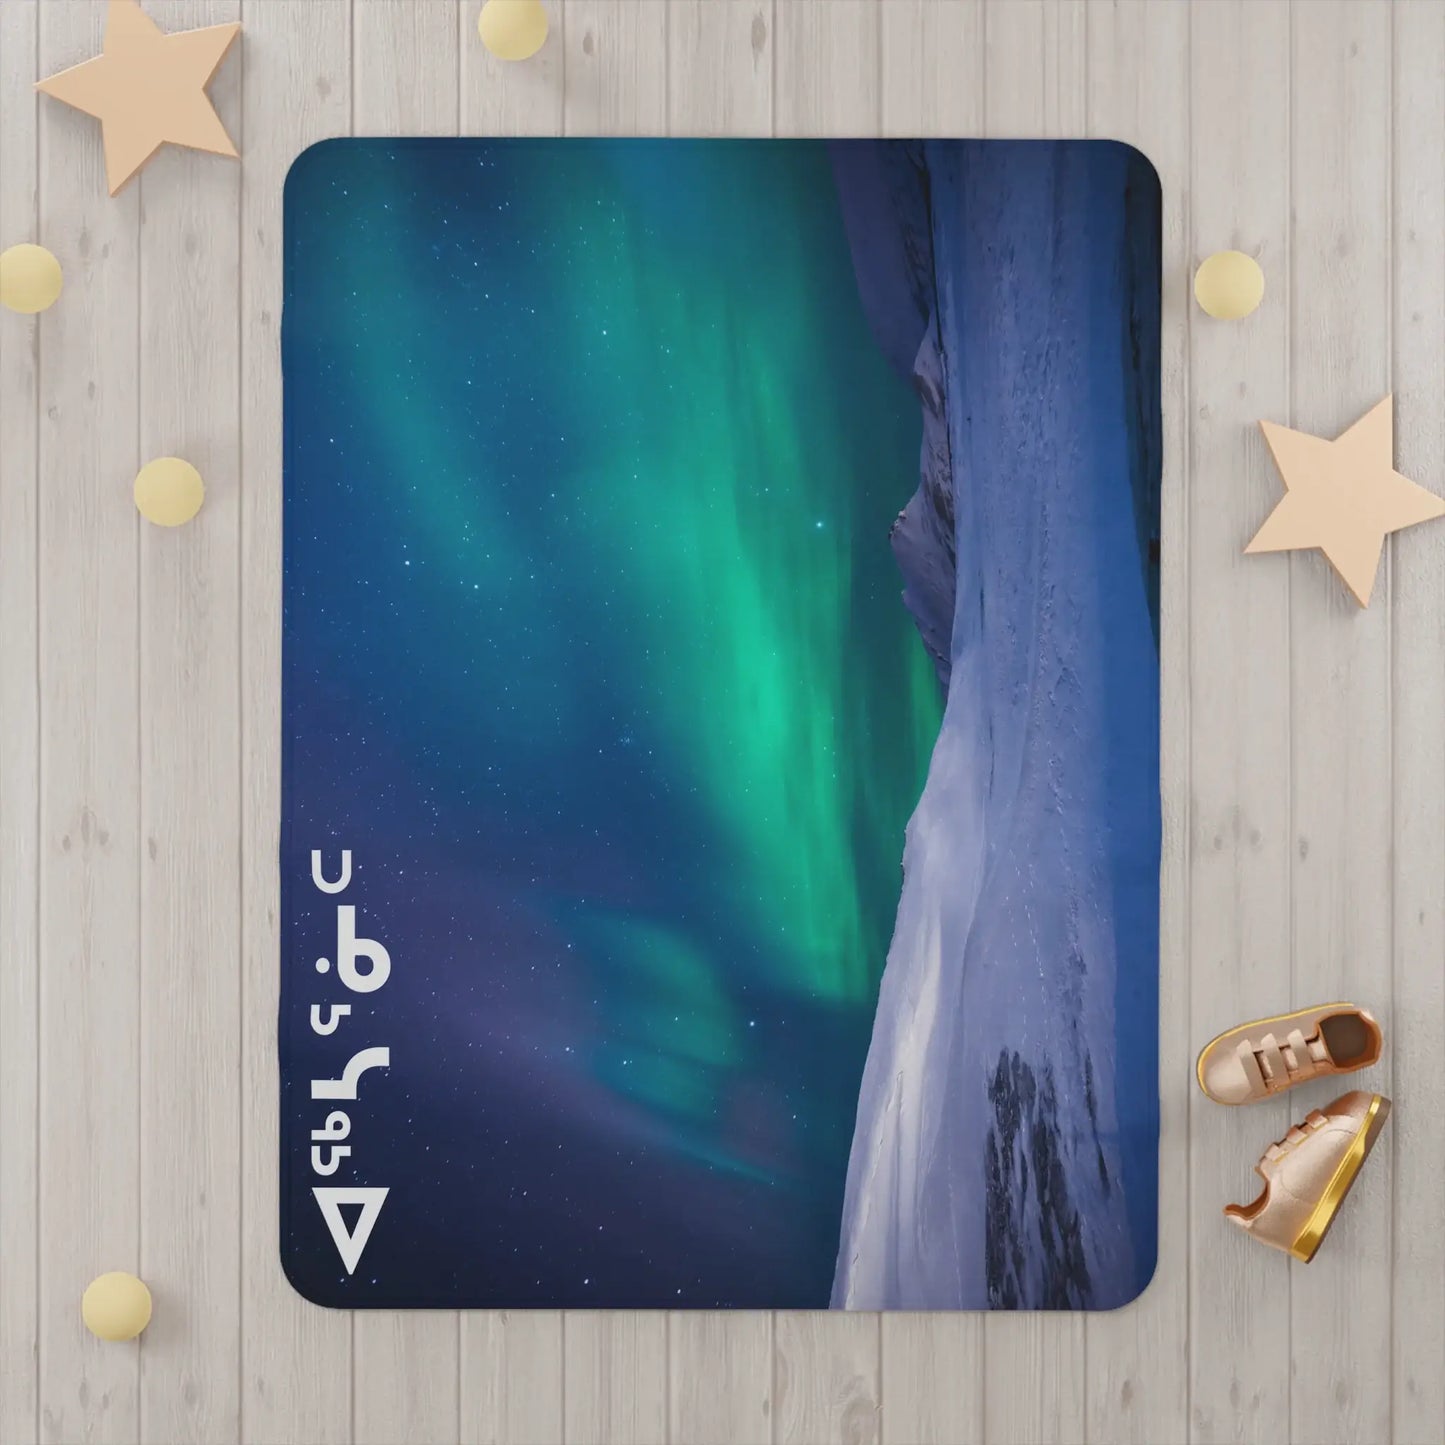 ᐊᖅᓴᕐᓃᑦ (Football Players) Northern Lights Toddler Blanket